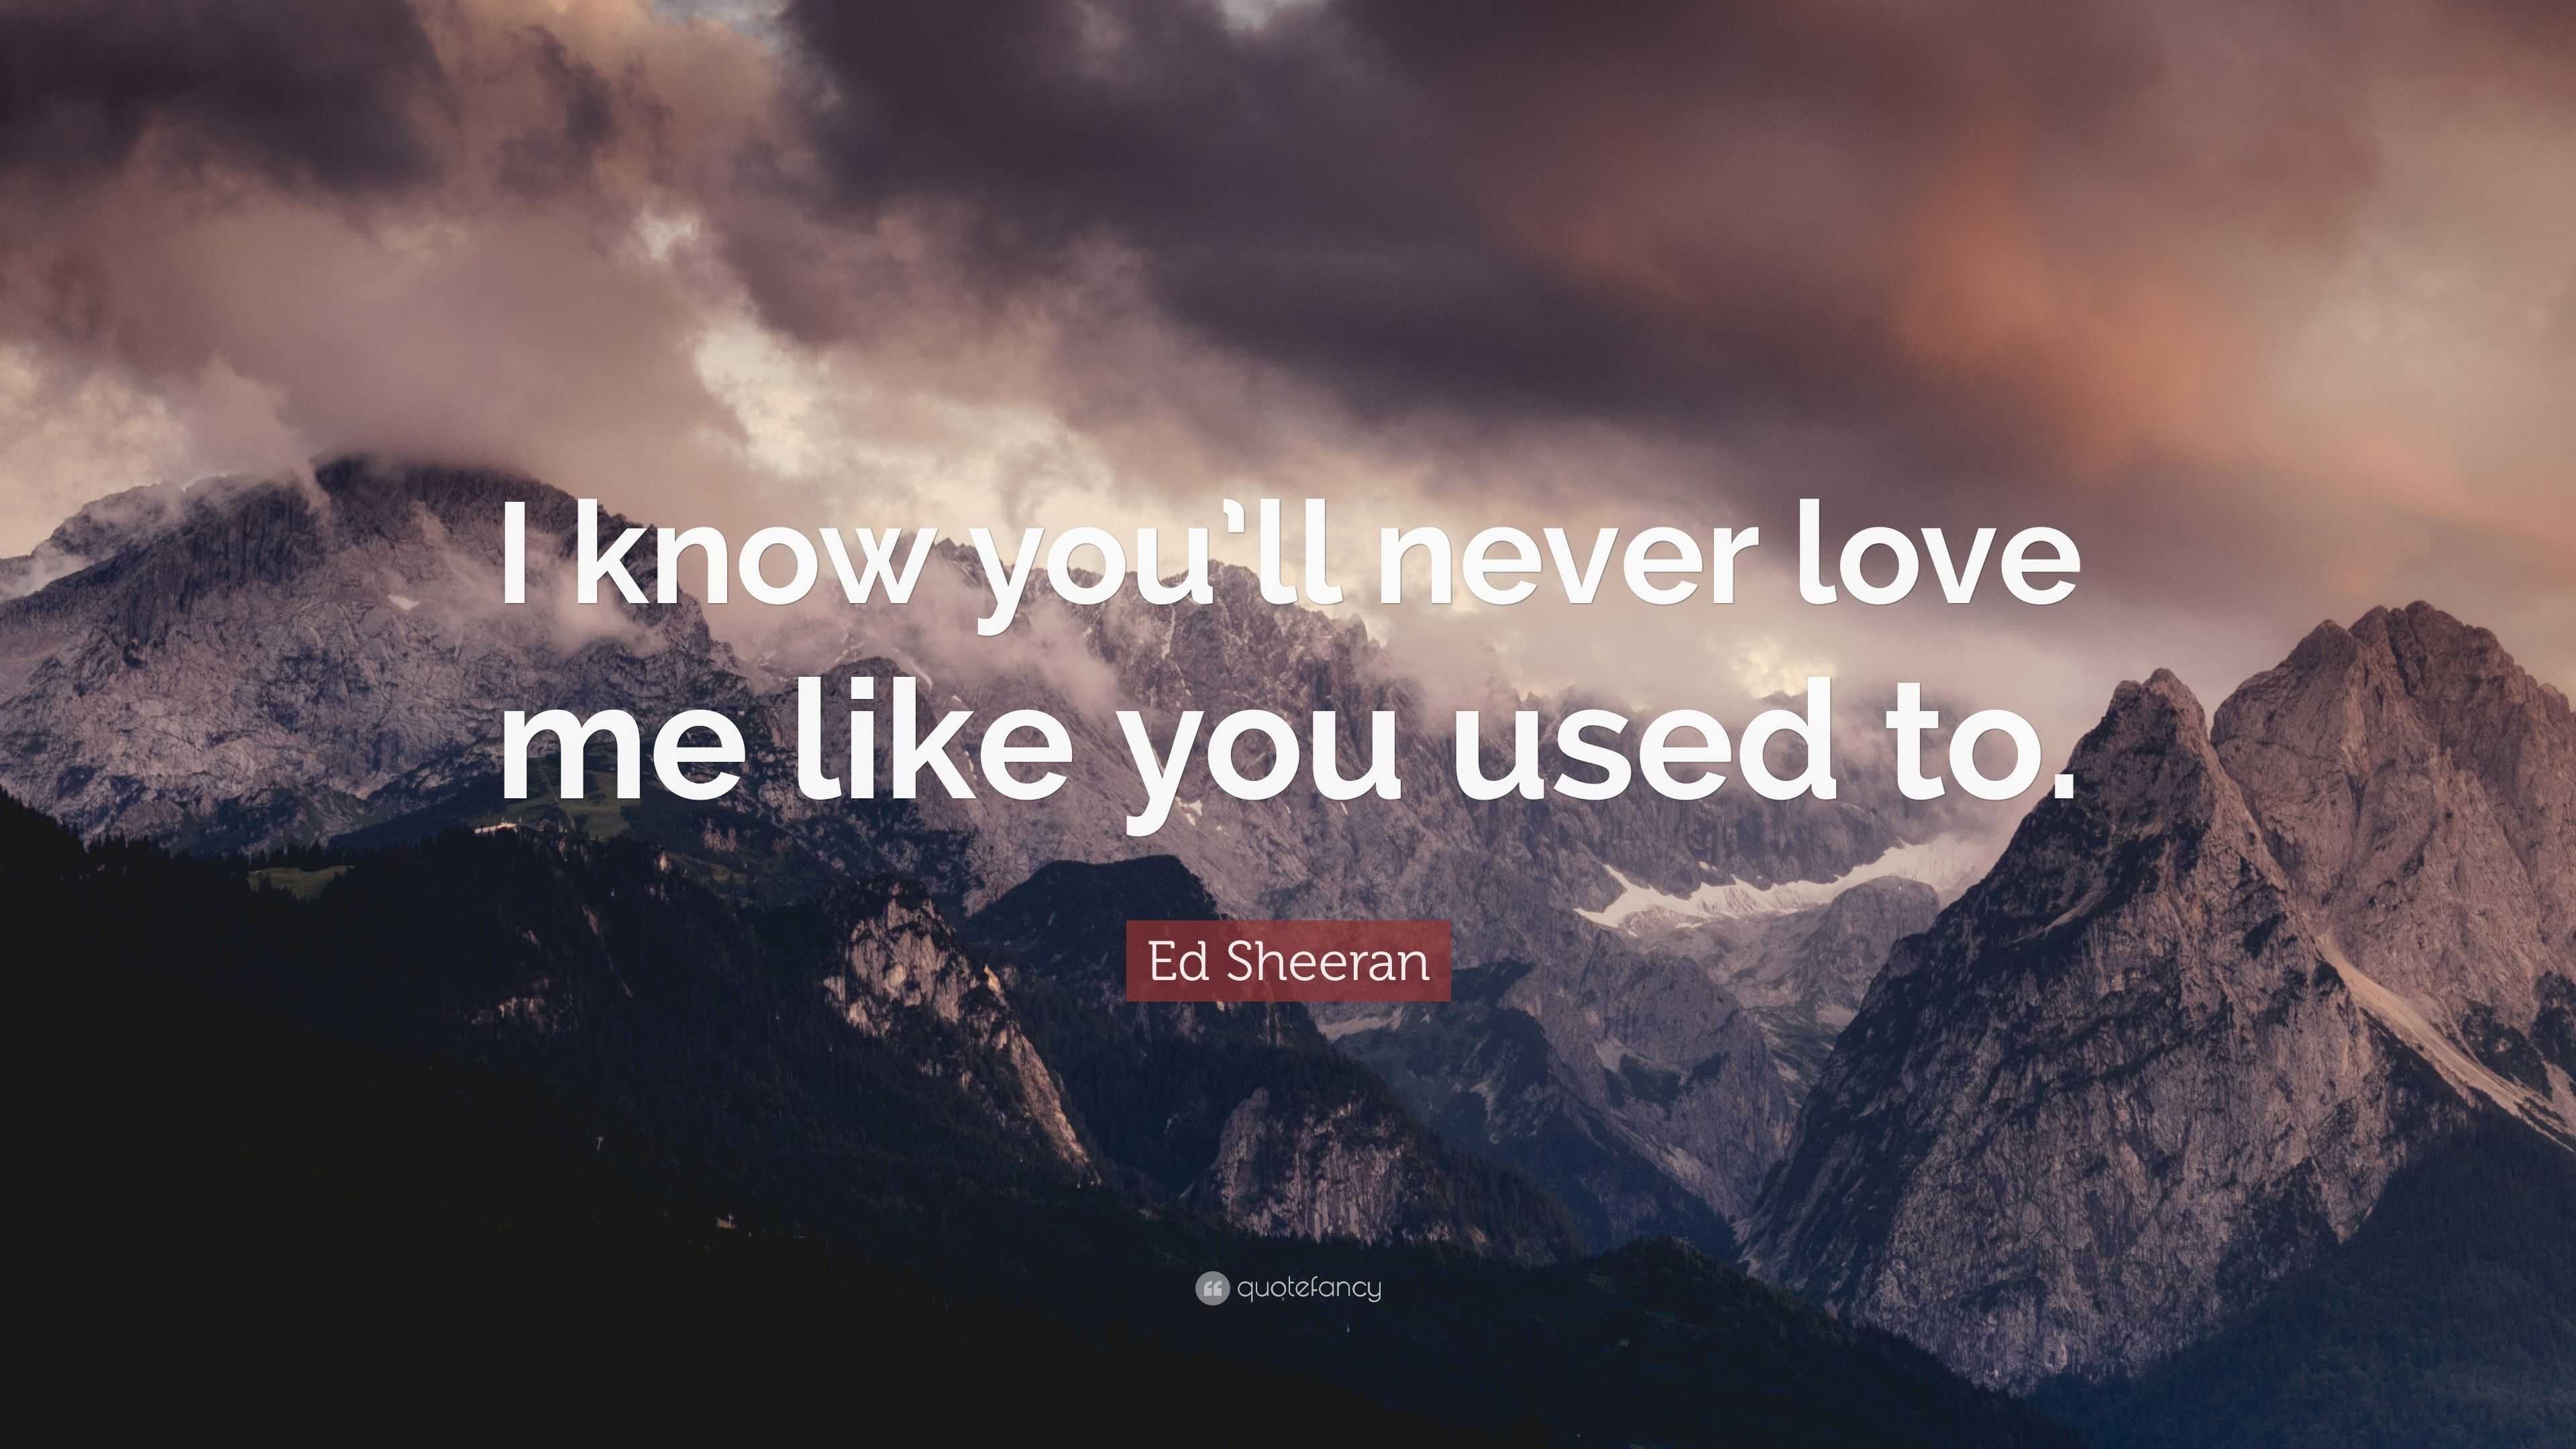 Ed Sheeran Quote “I know you ll never love me like you used